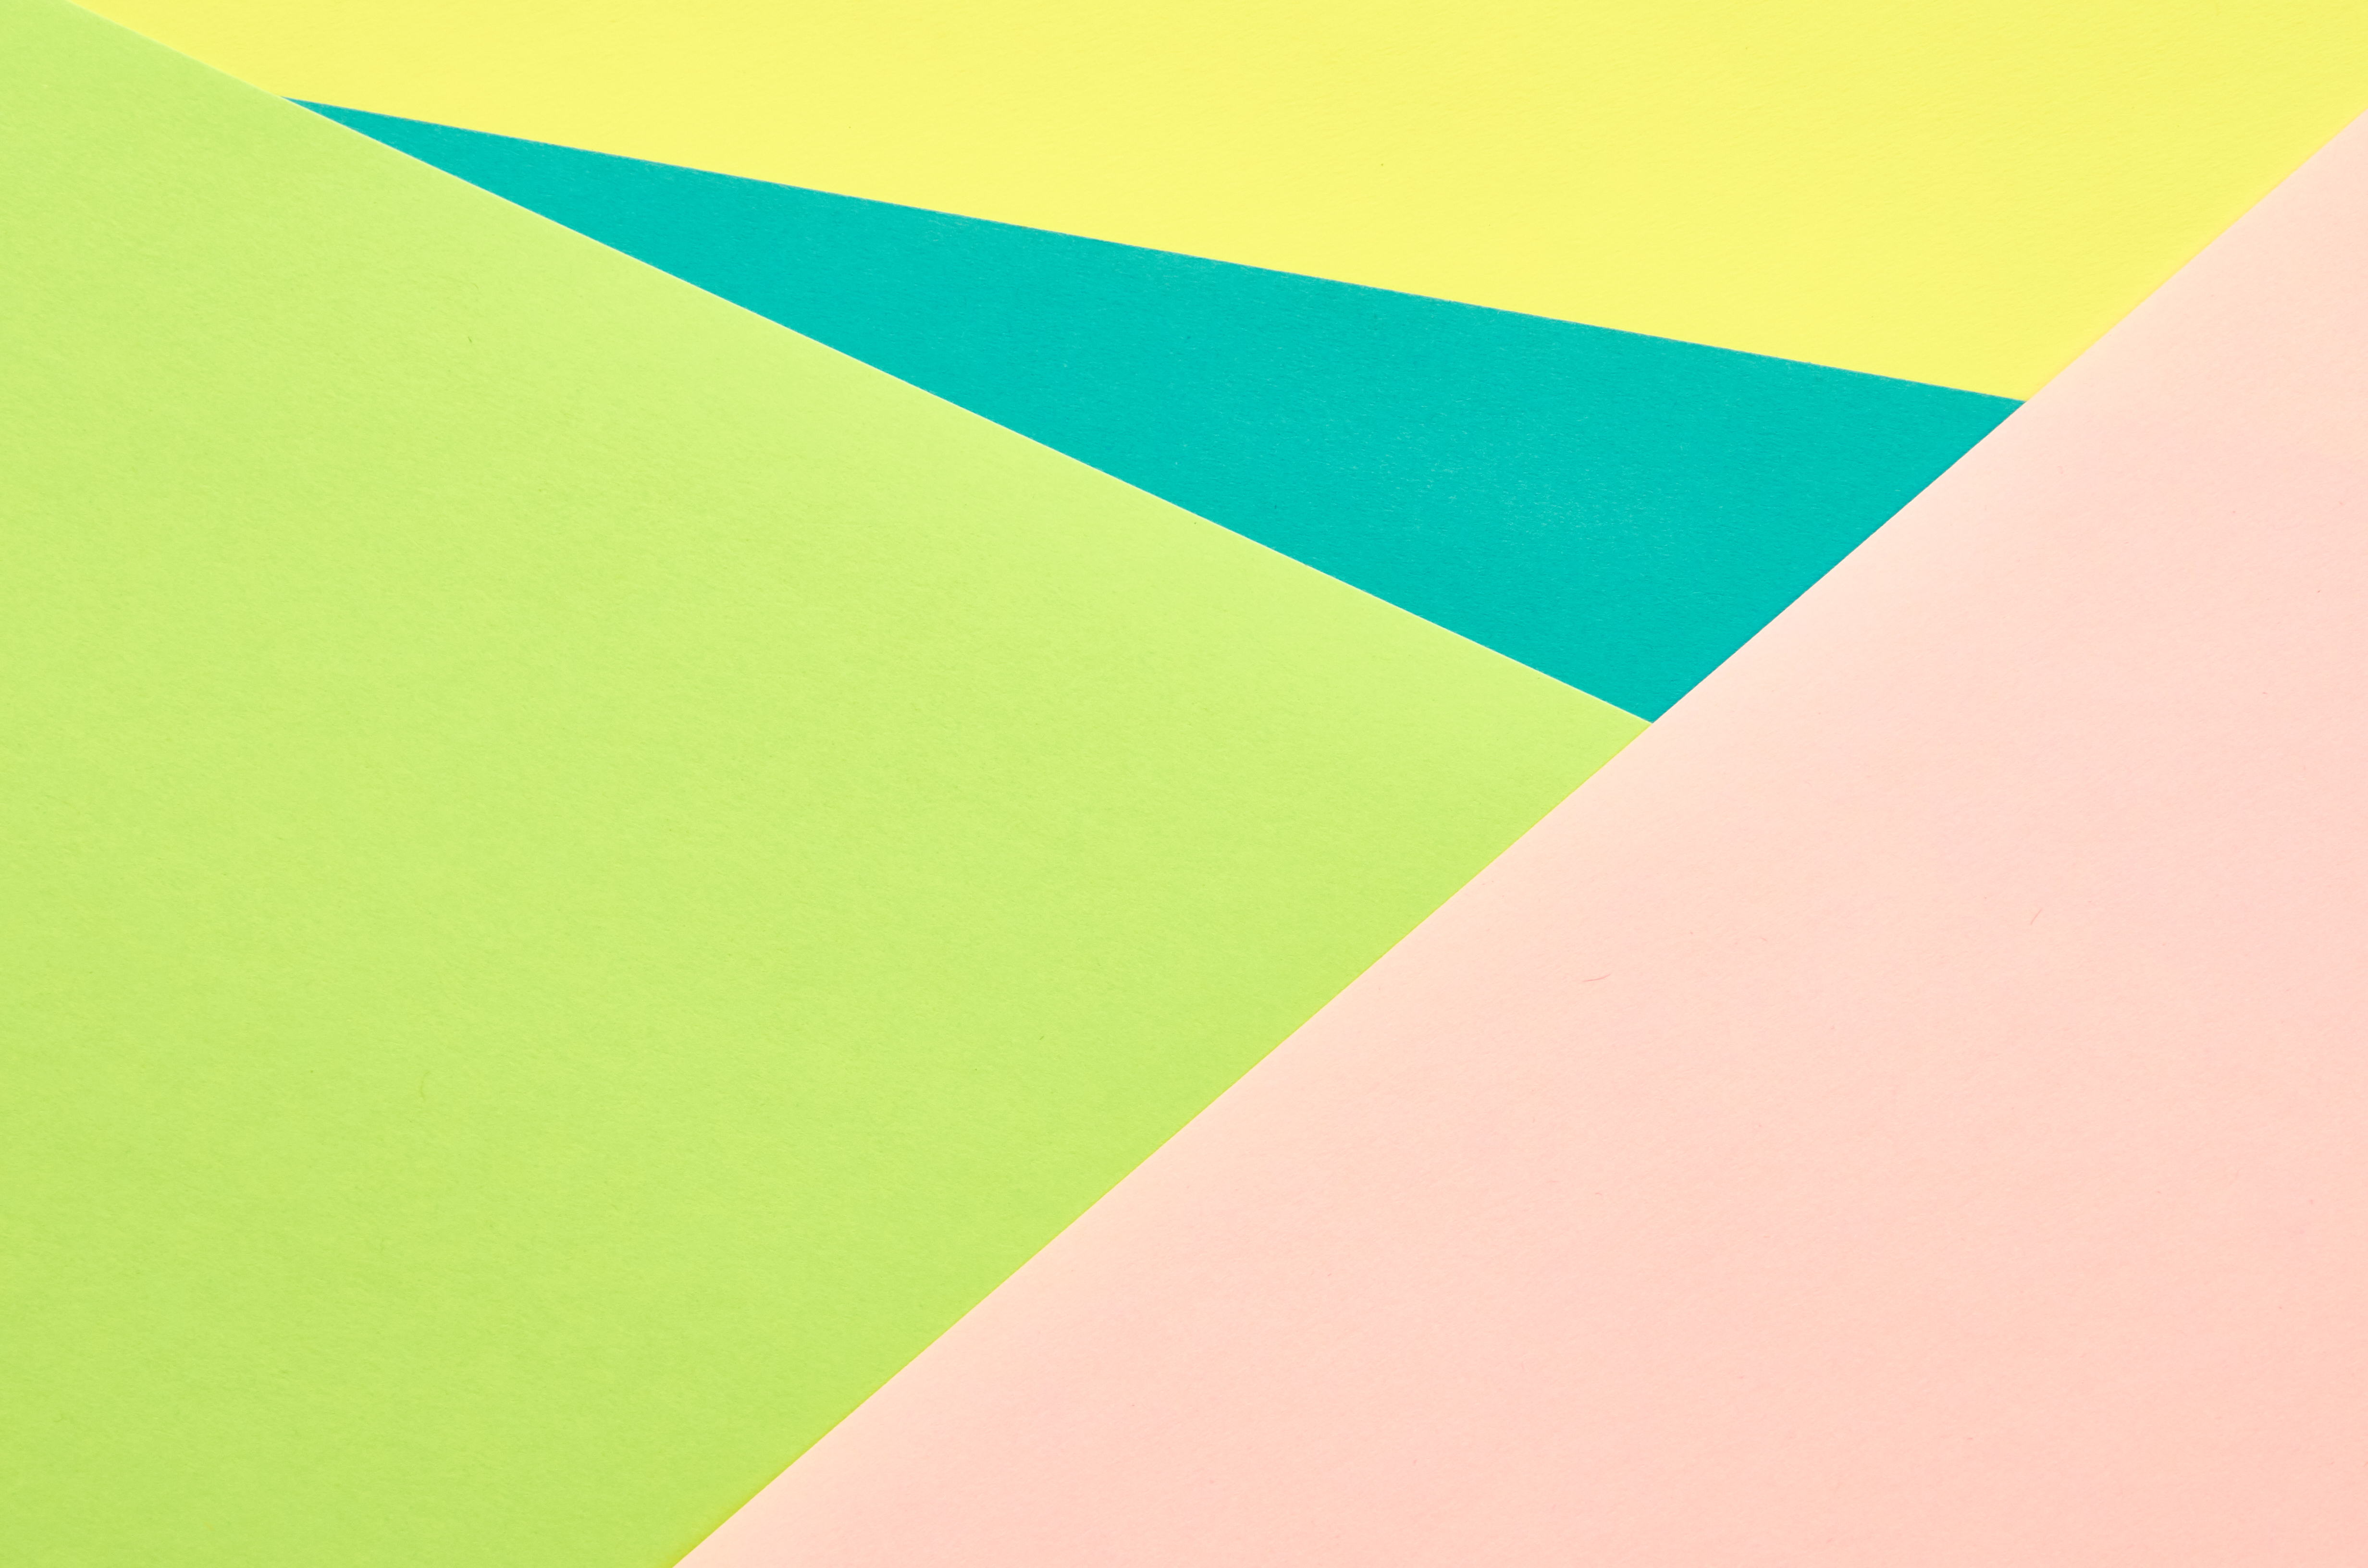 motley, multicolored, abstract, shape, shapes, triangles, fragments cell phone wallpapers